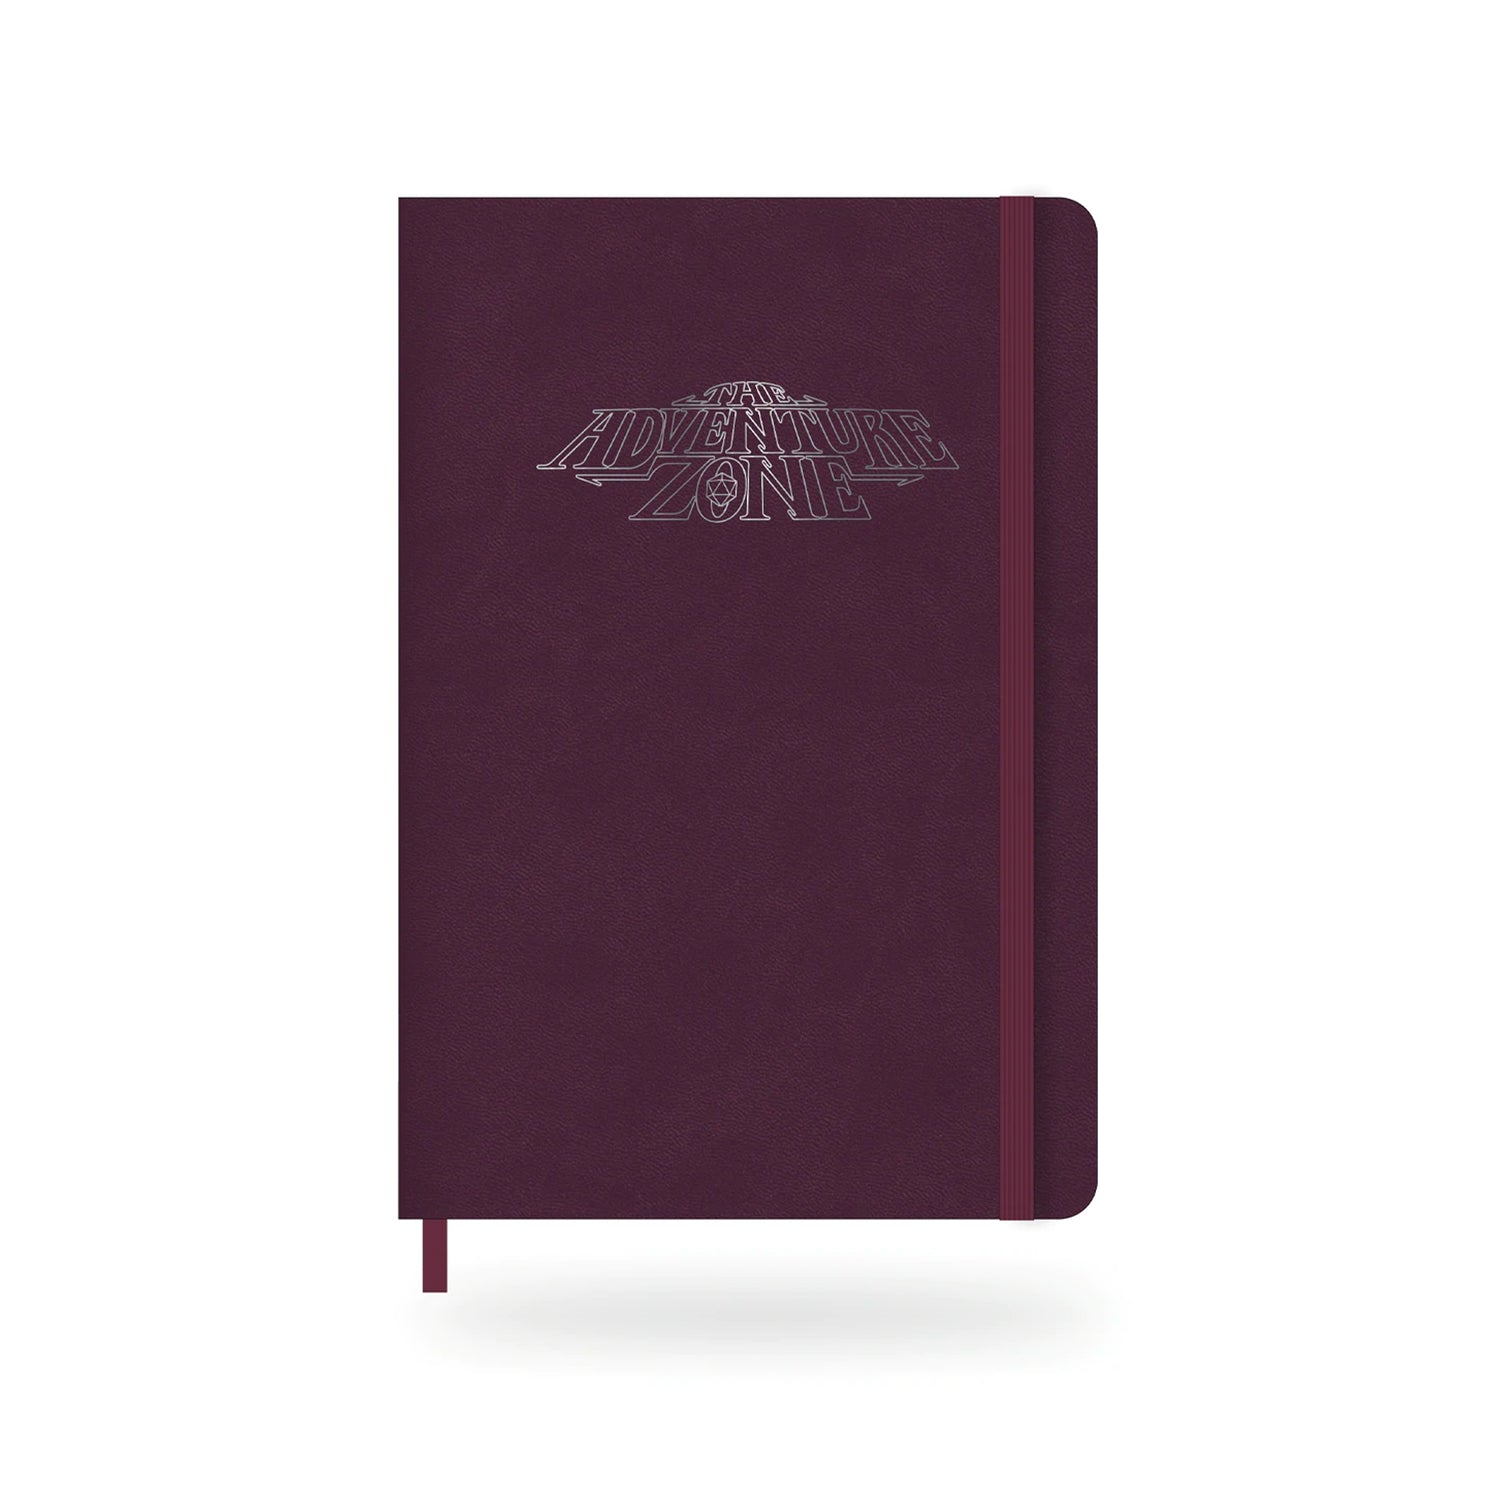 A maroon notebook embossed with the TAZ logo. It has an elastic band holding it shut.